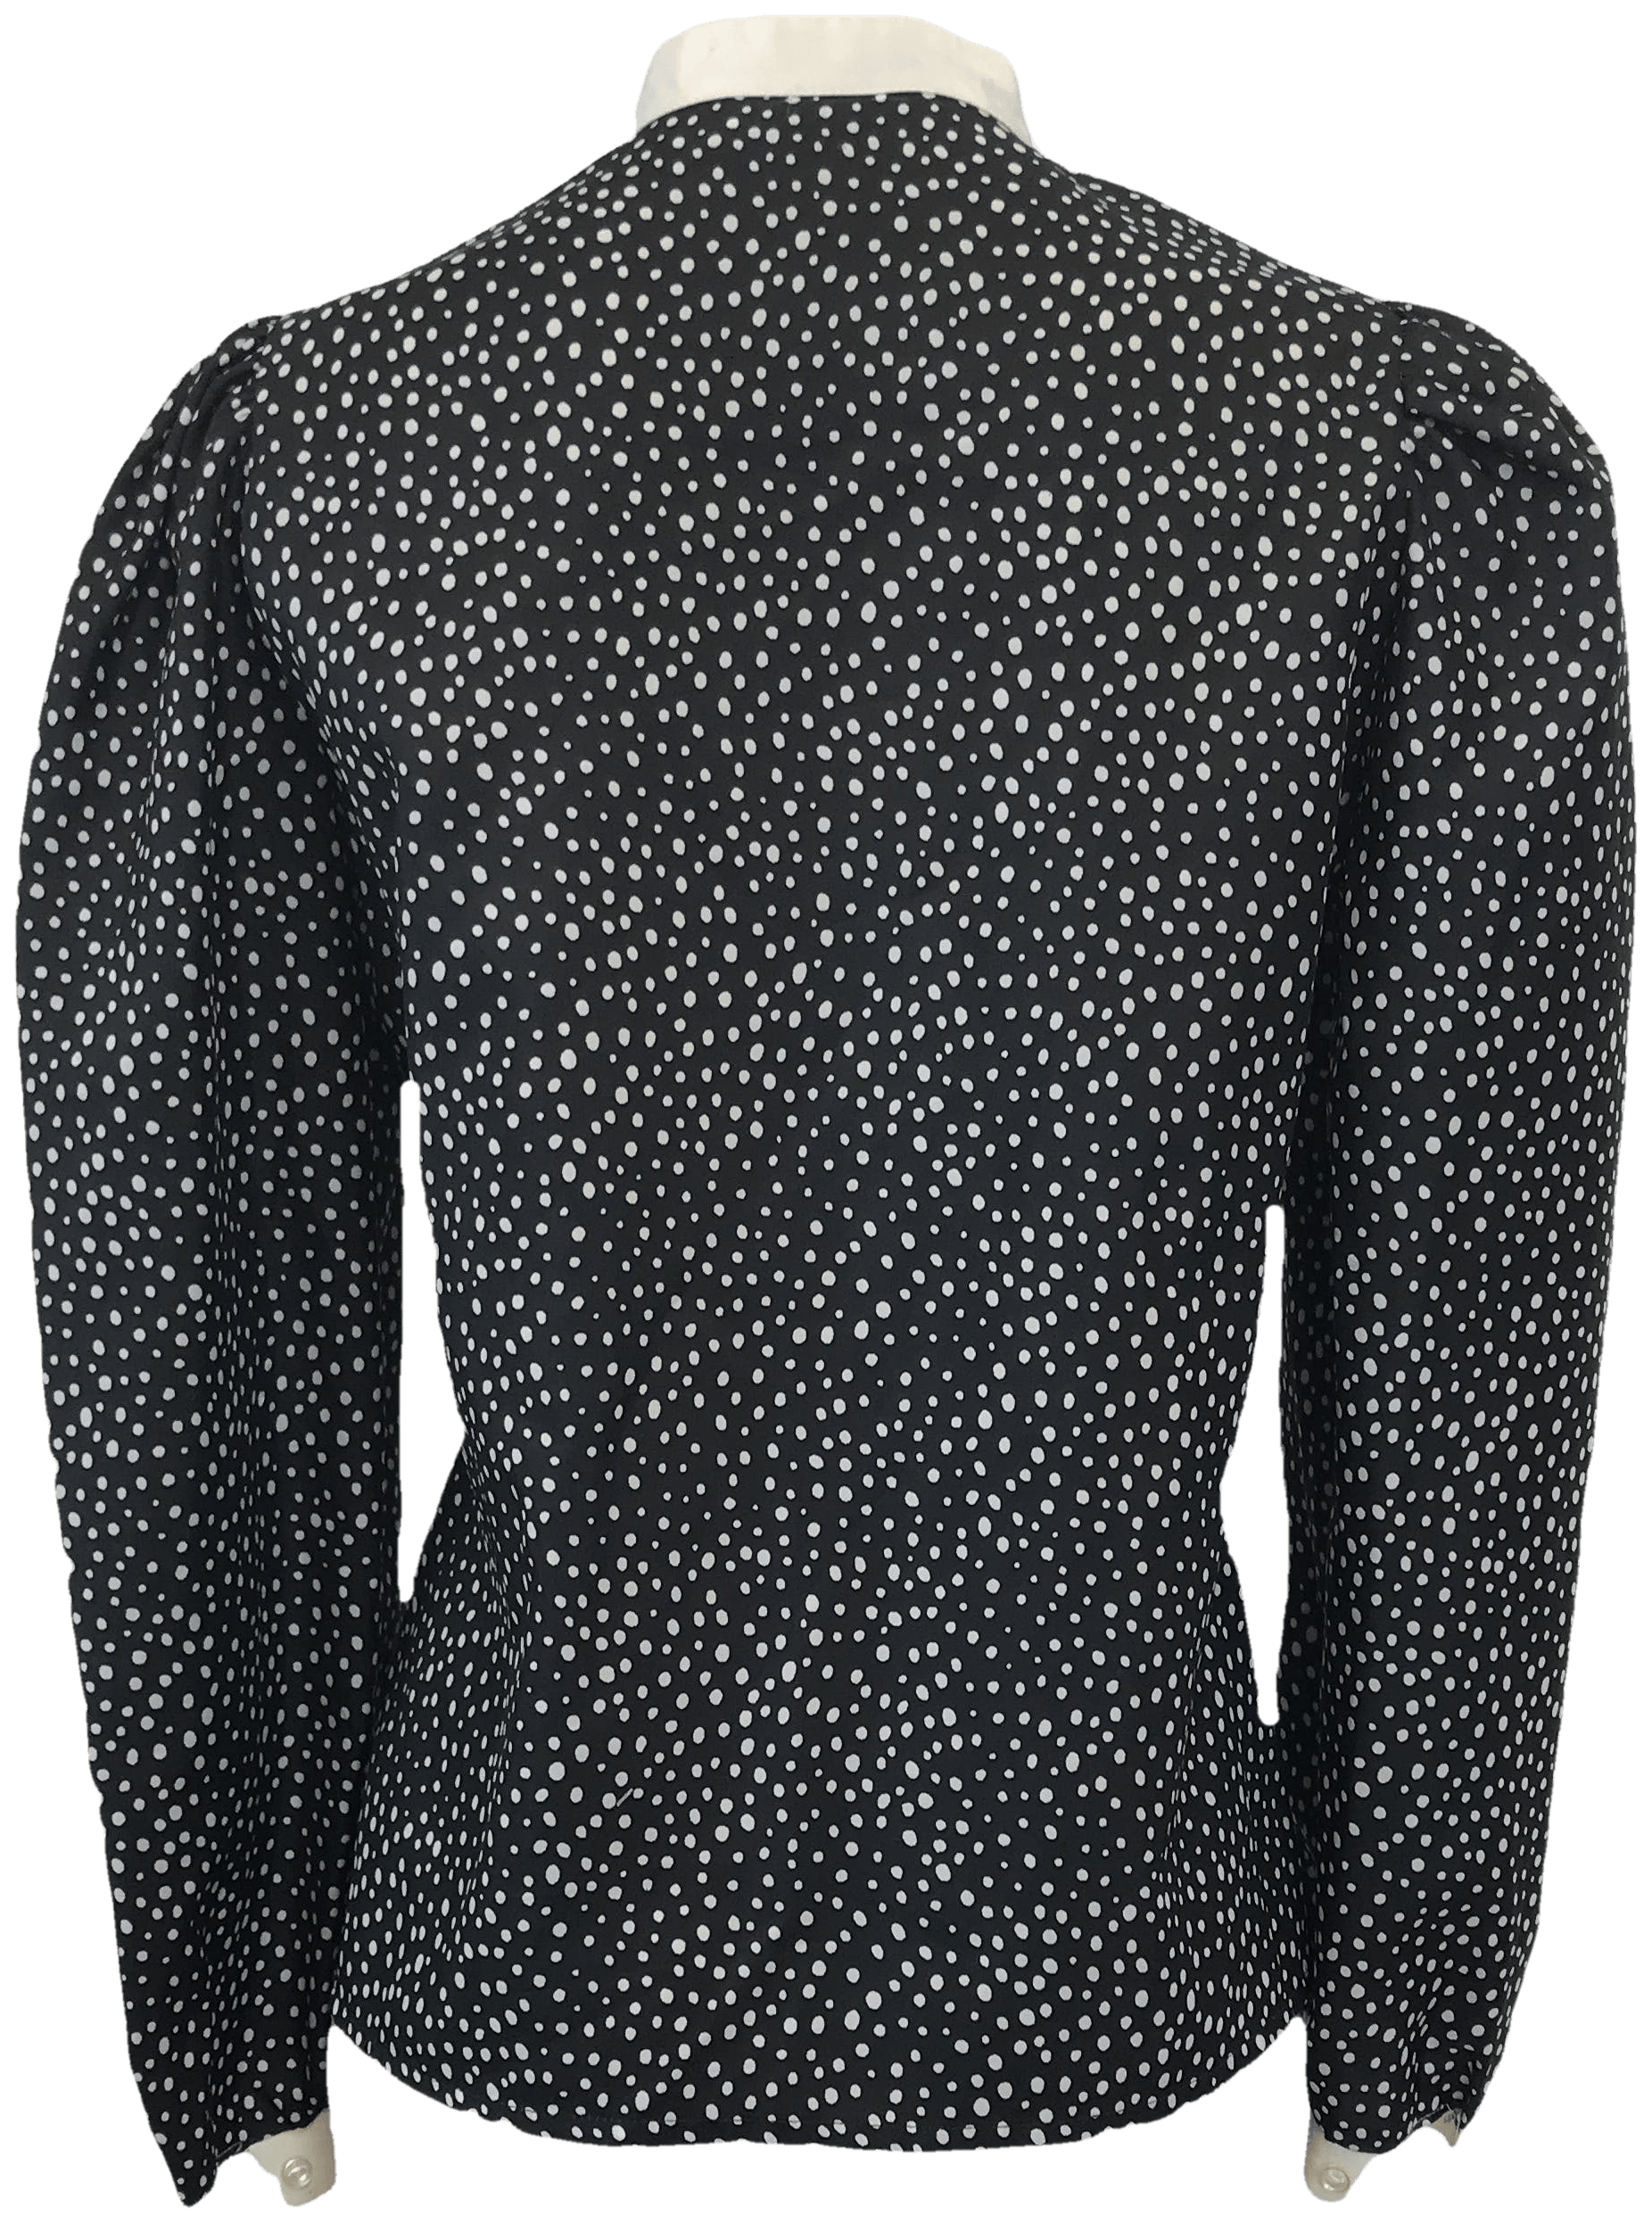 Vintage 80's Black and White Polka Dot Button Up by Kassie | Shop THRILLING